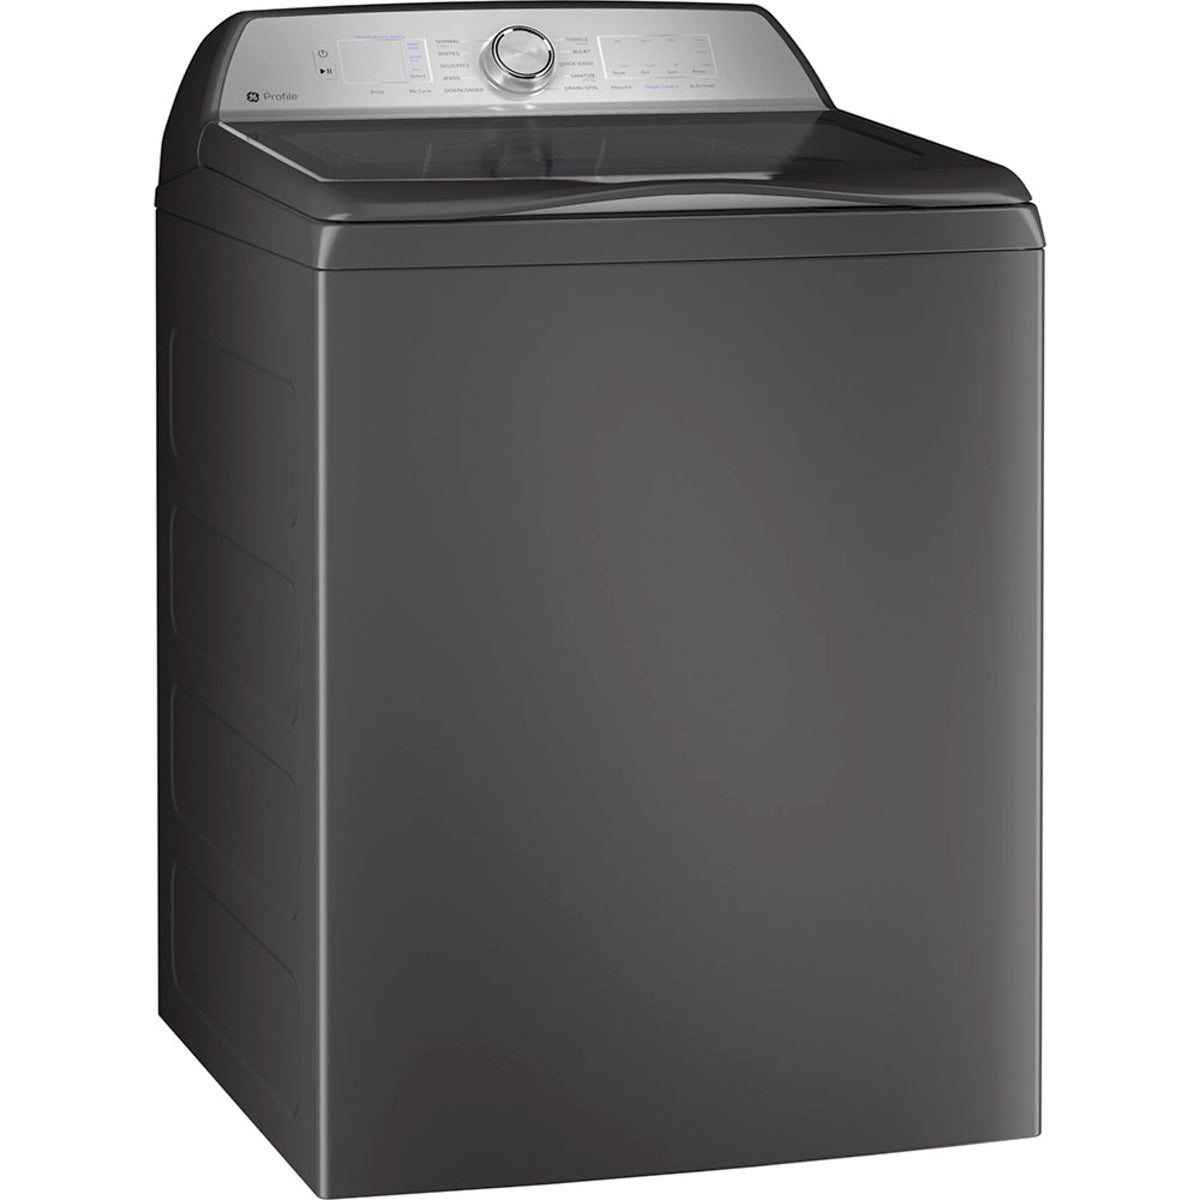 GE Profile - 5.8 cu. Ft  Top Load Washer in Grey - PTW600BPRDG